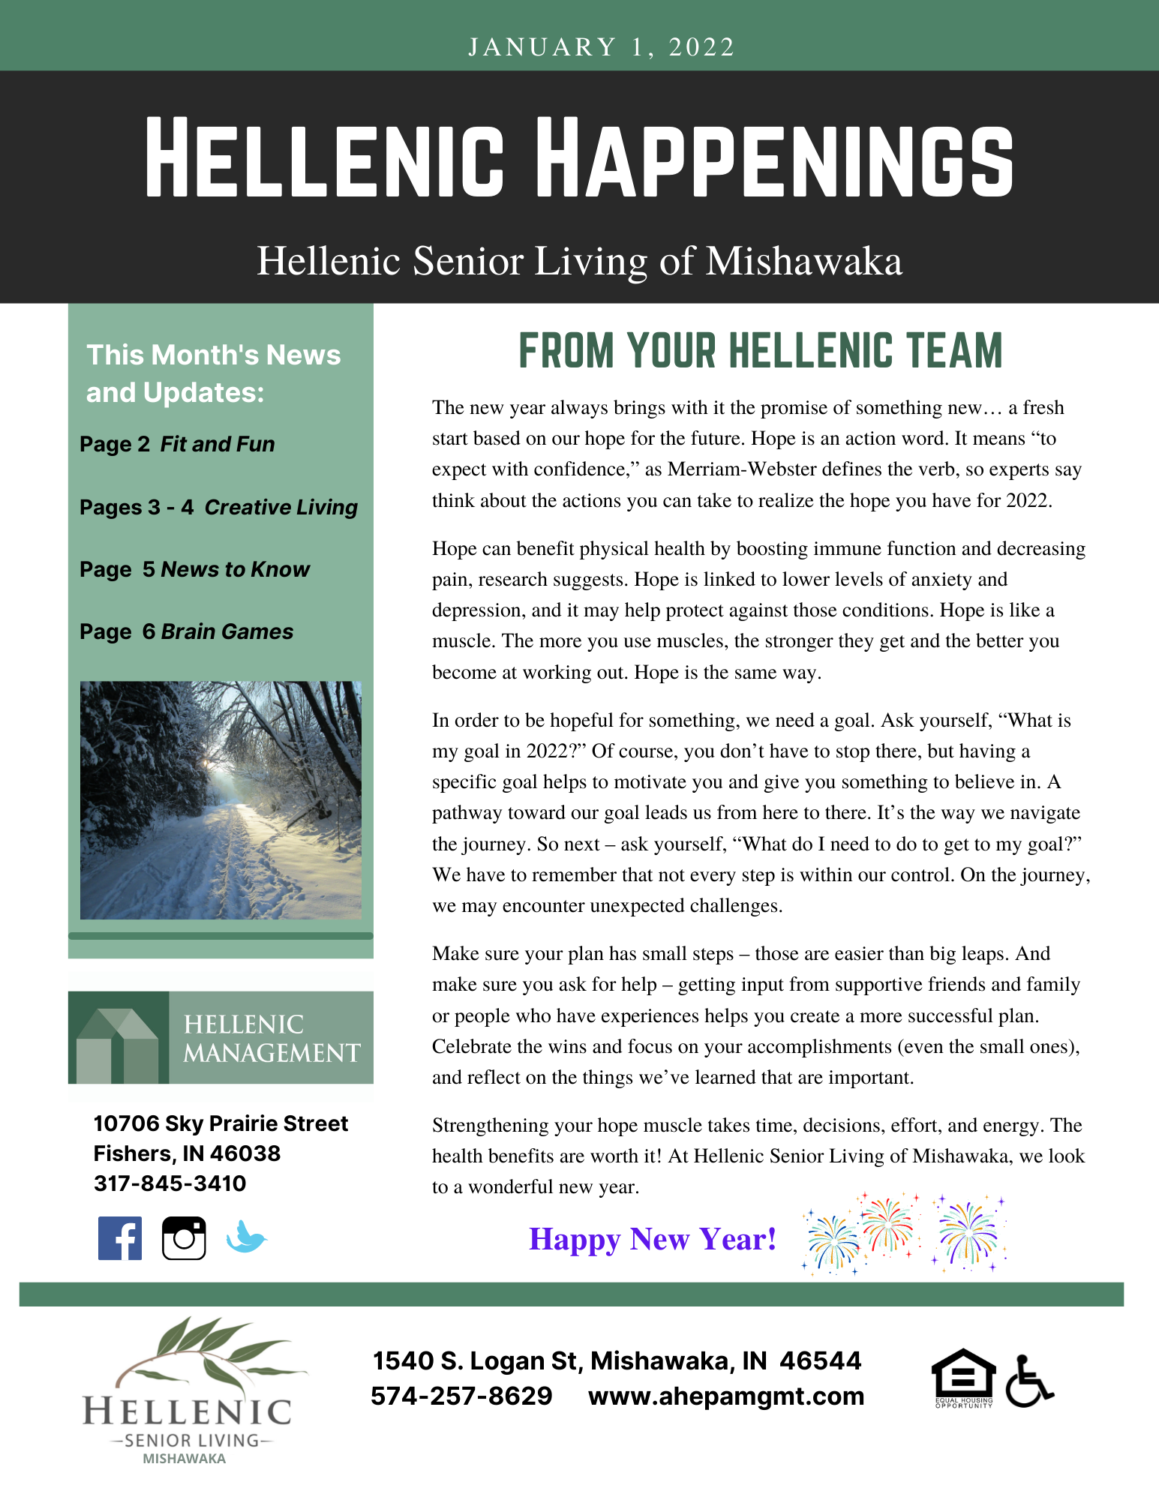 Hellenic Happenings January 2022 Newsletter, page 1